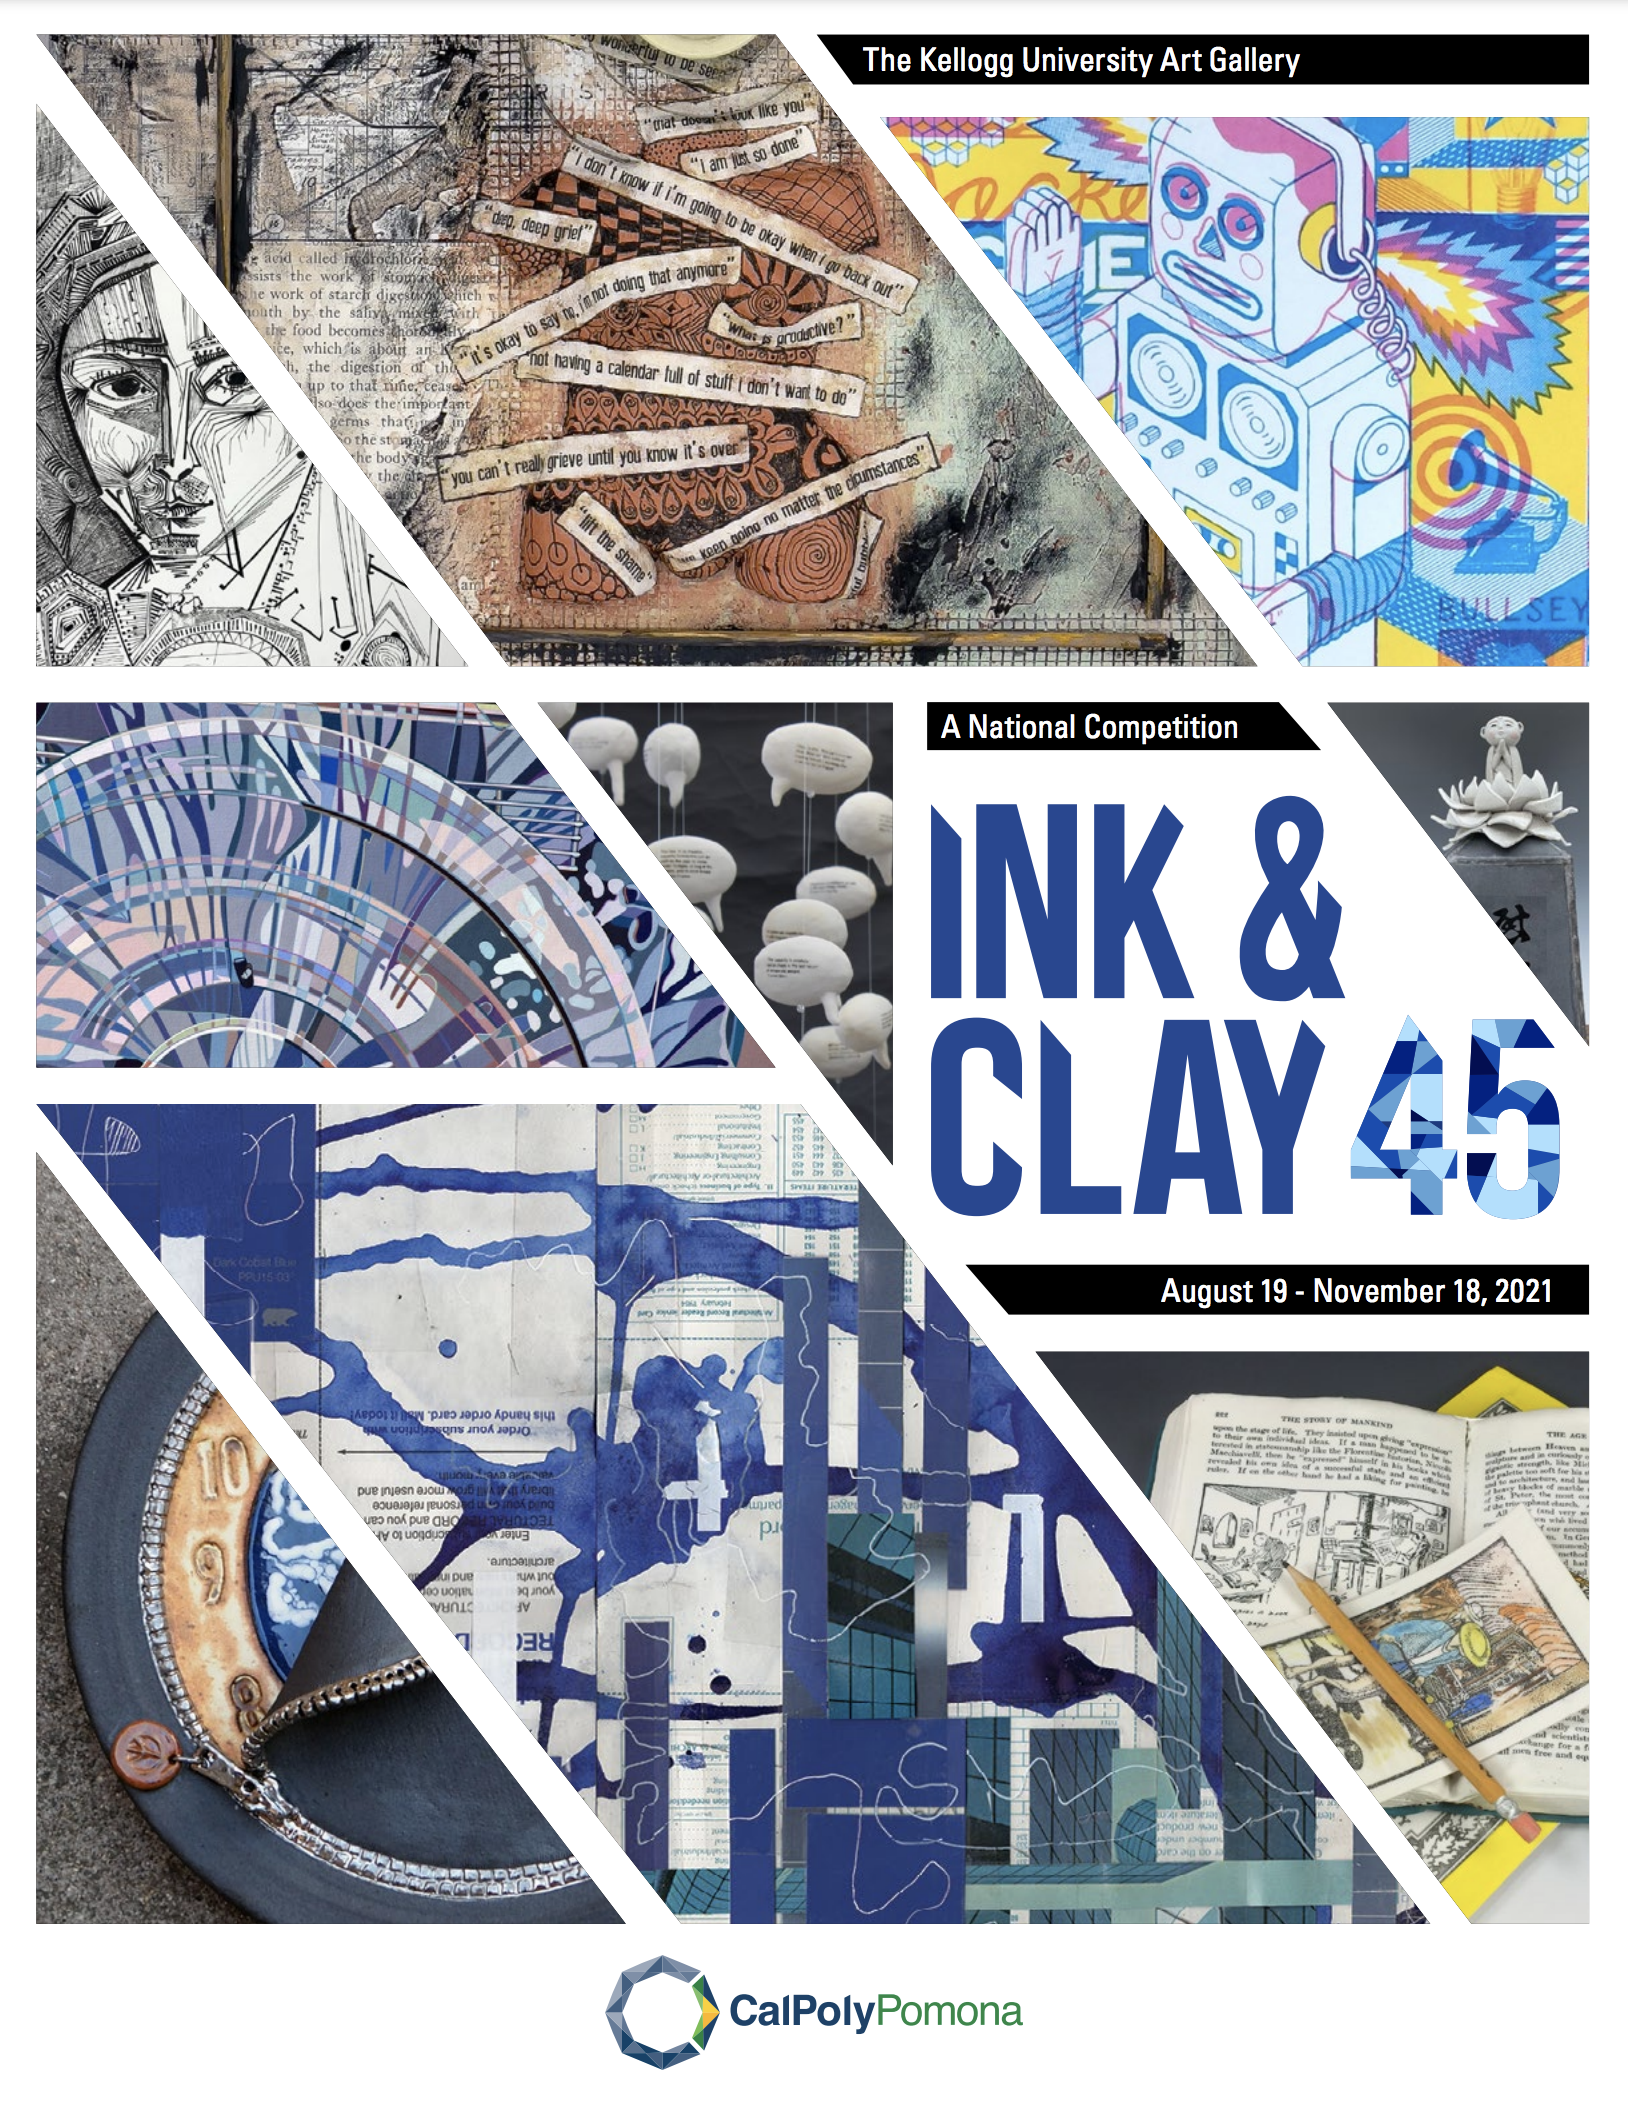 Ink & Clay 45 Catalog cover